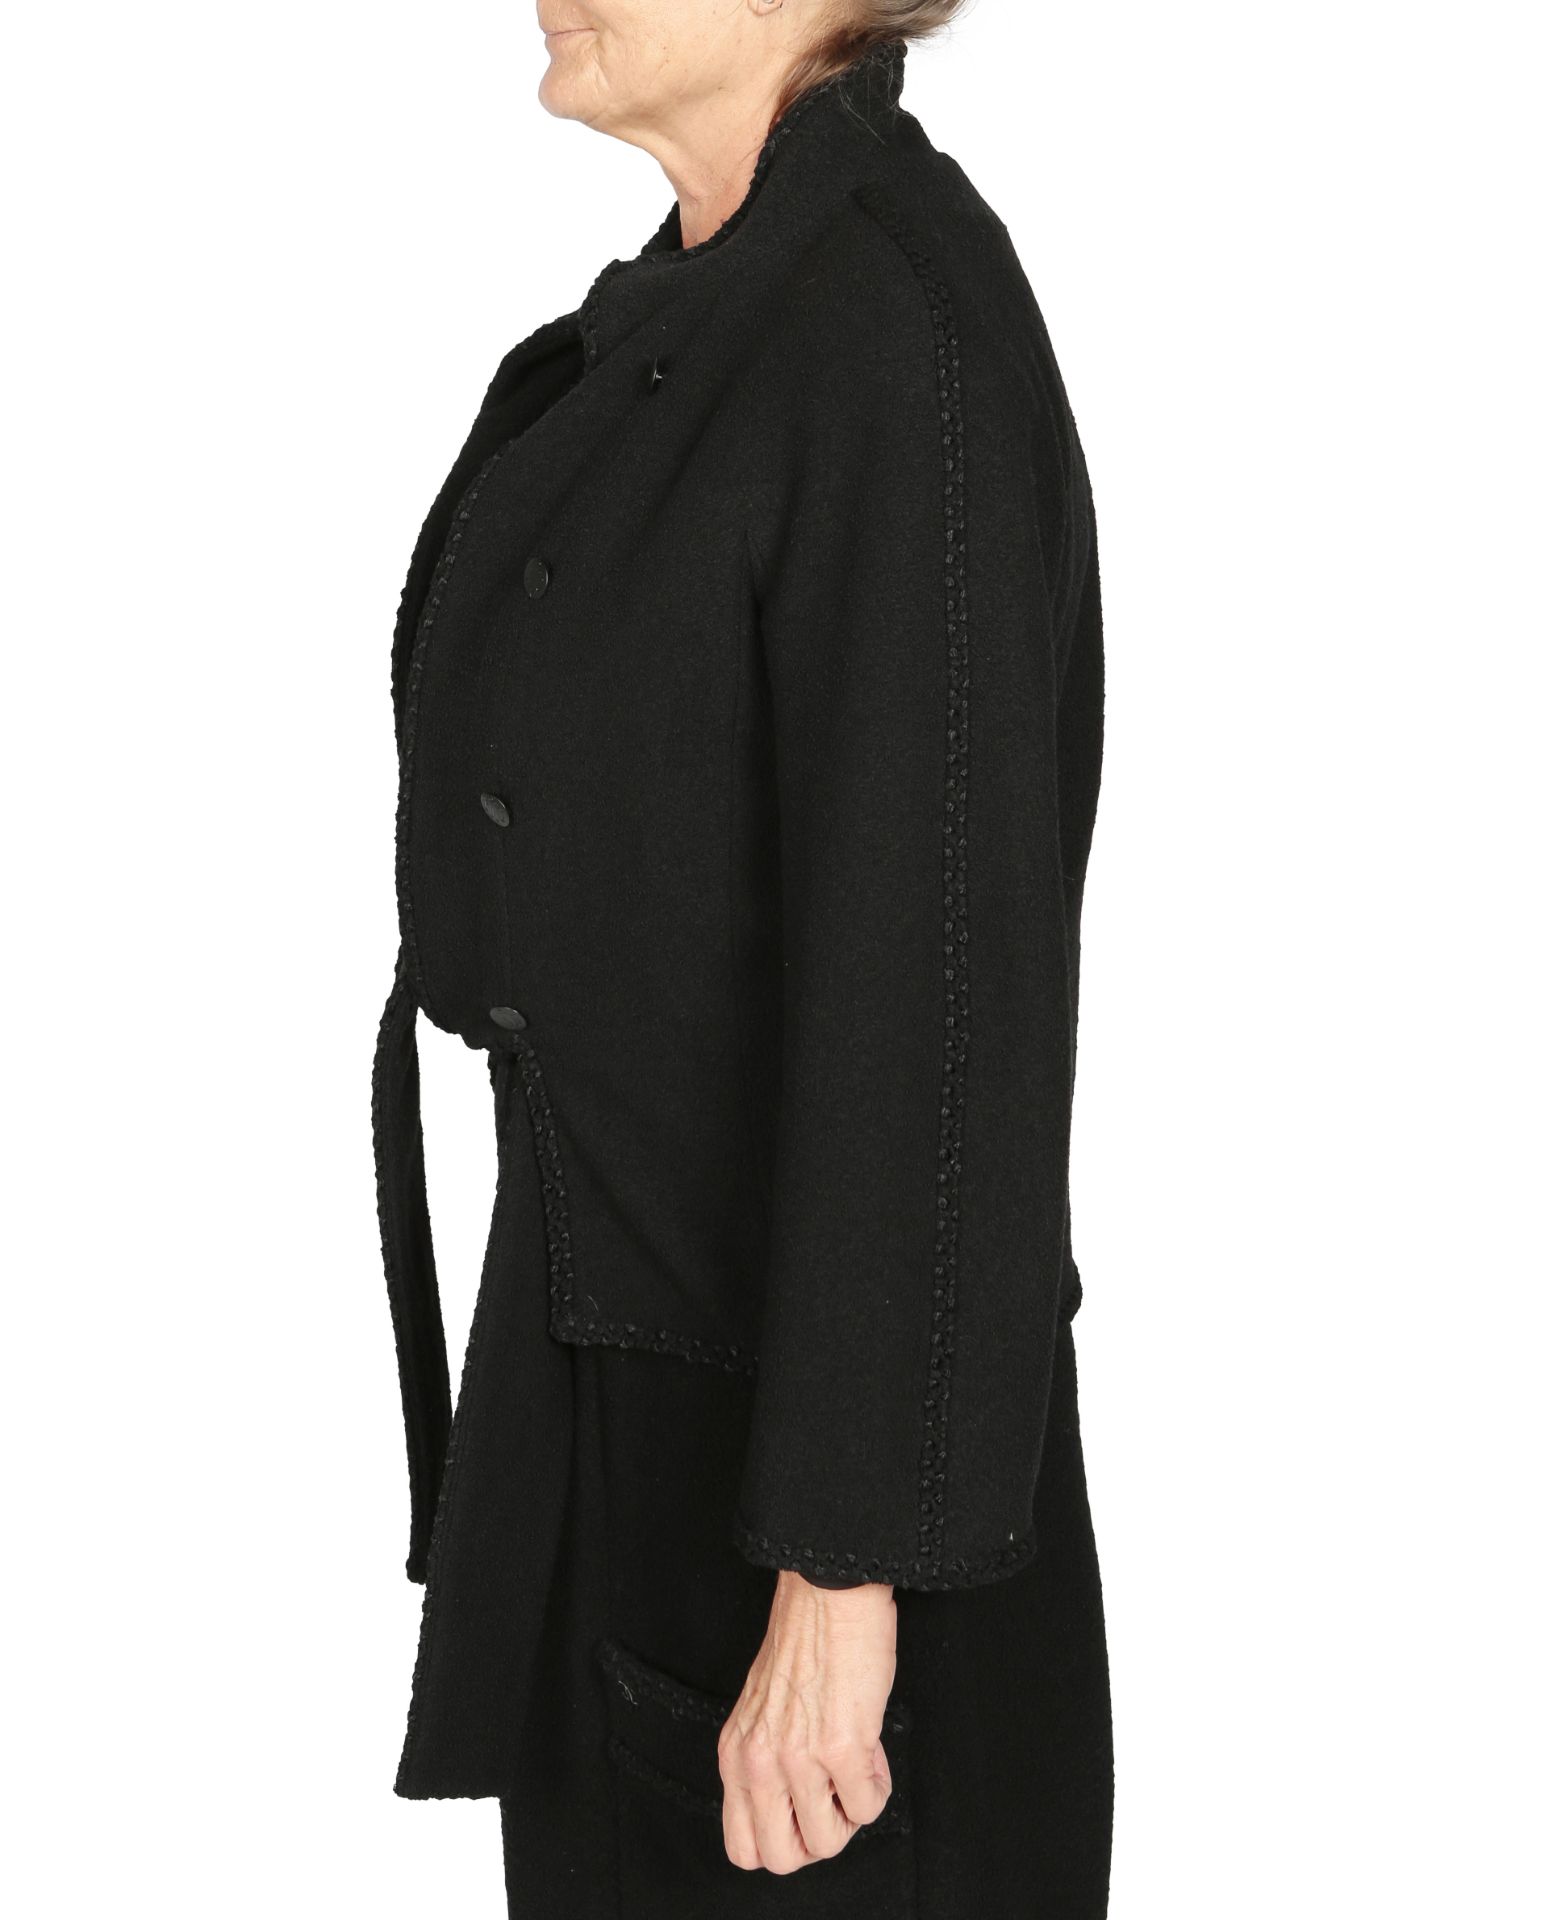 CHANEL, A BLACK WOOL JACKET - Image 2 of 5